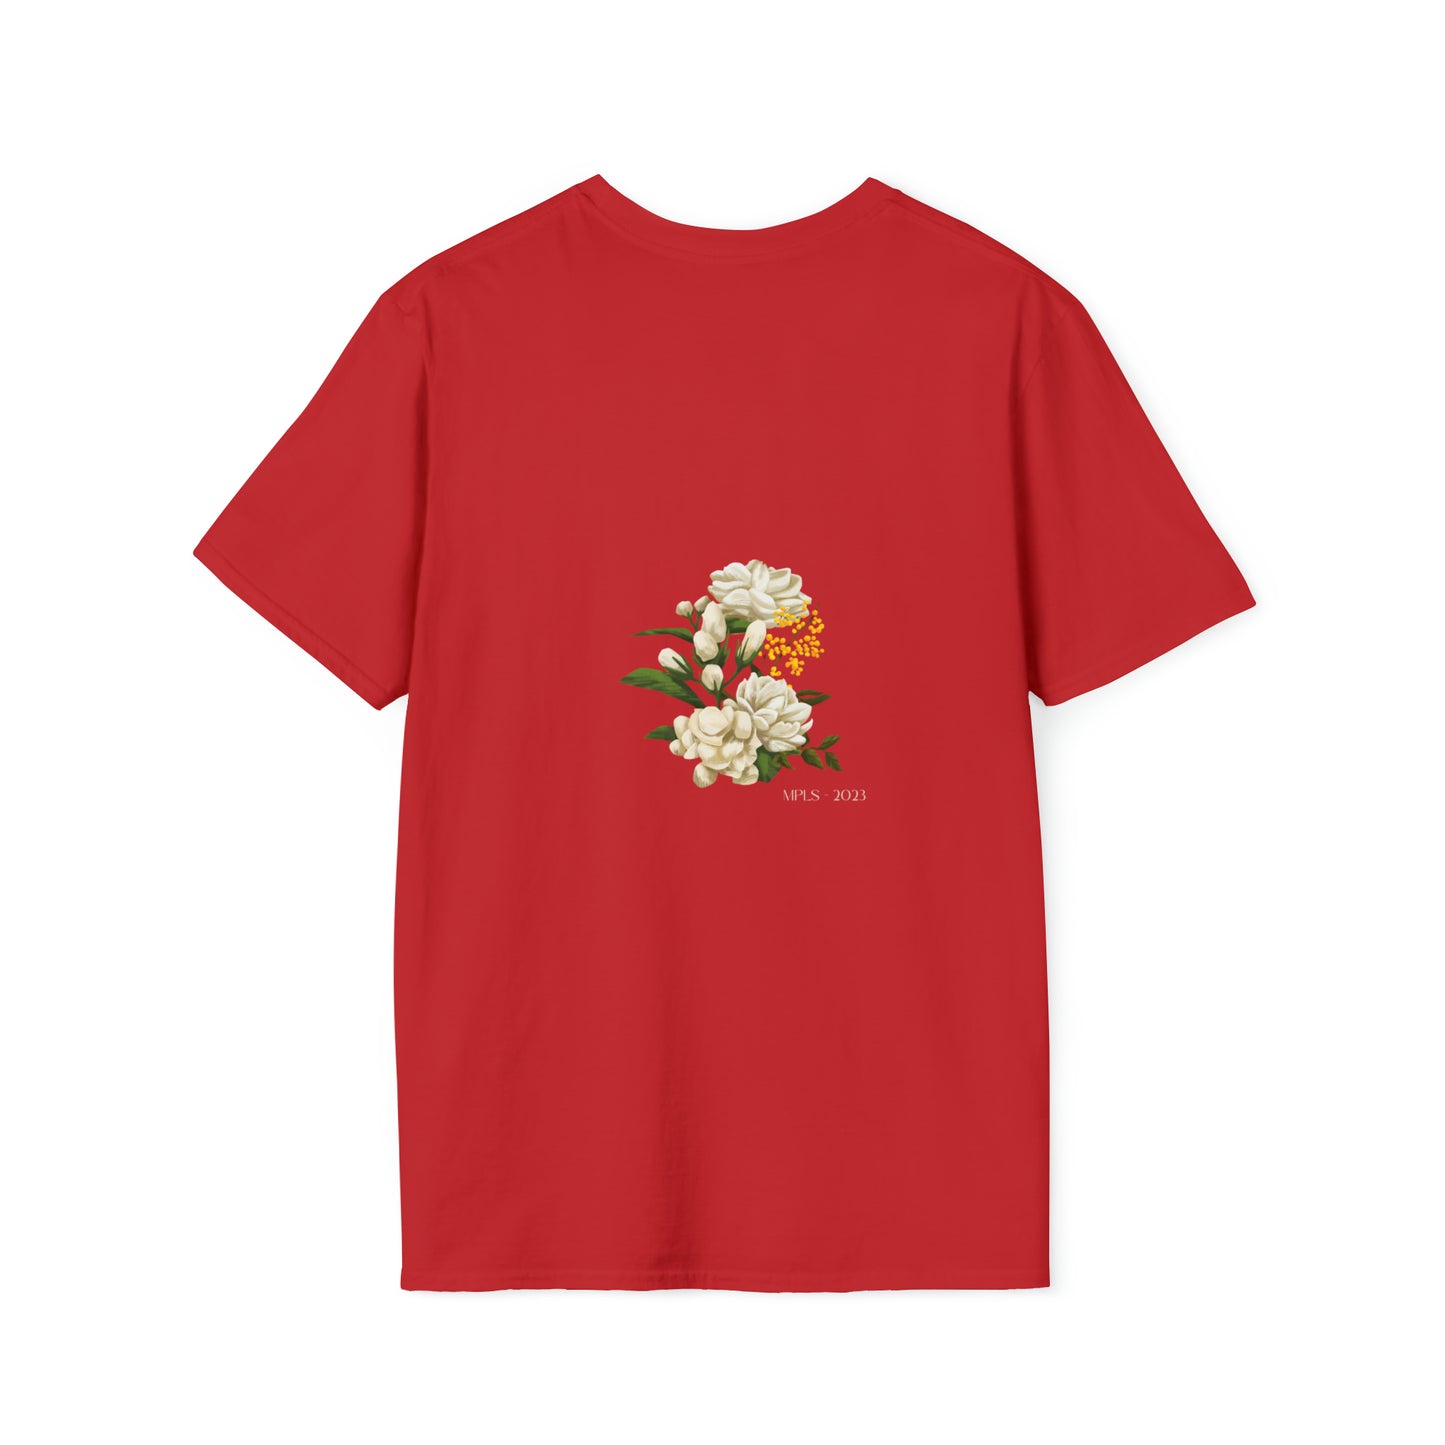 Make It Good Floral Print Unisex Softstyle T-Shirt